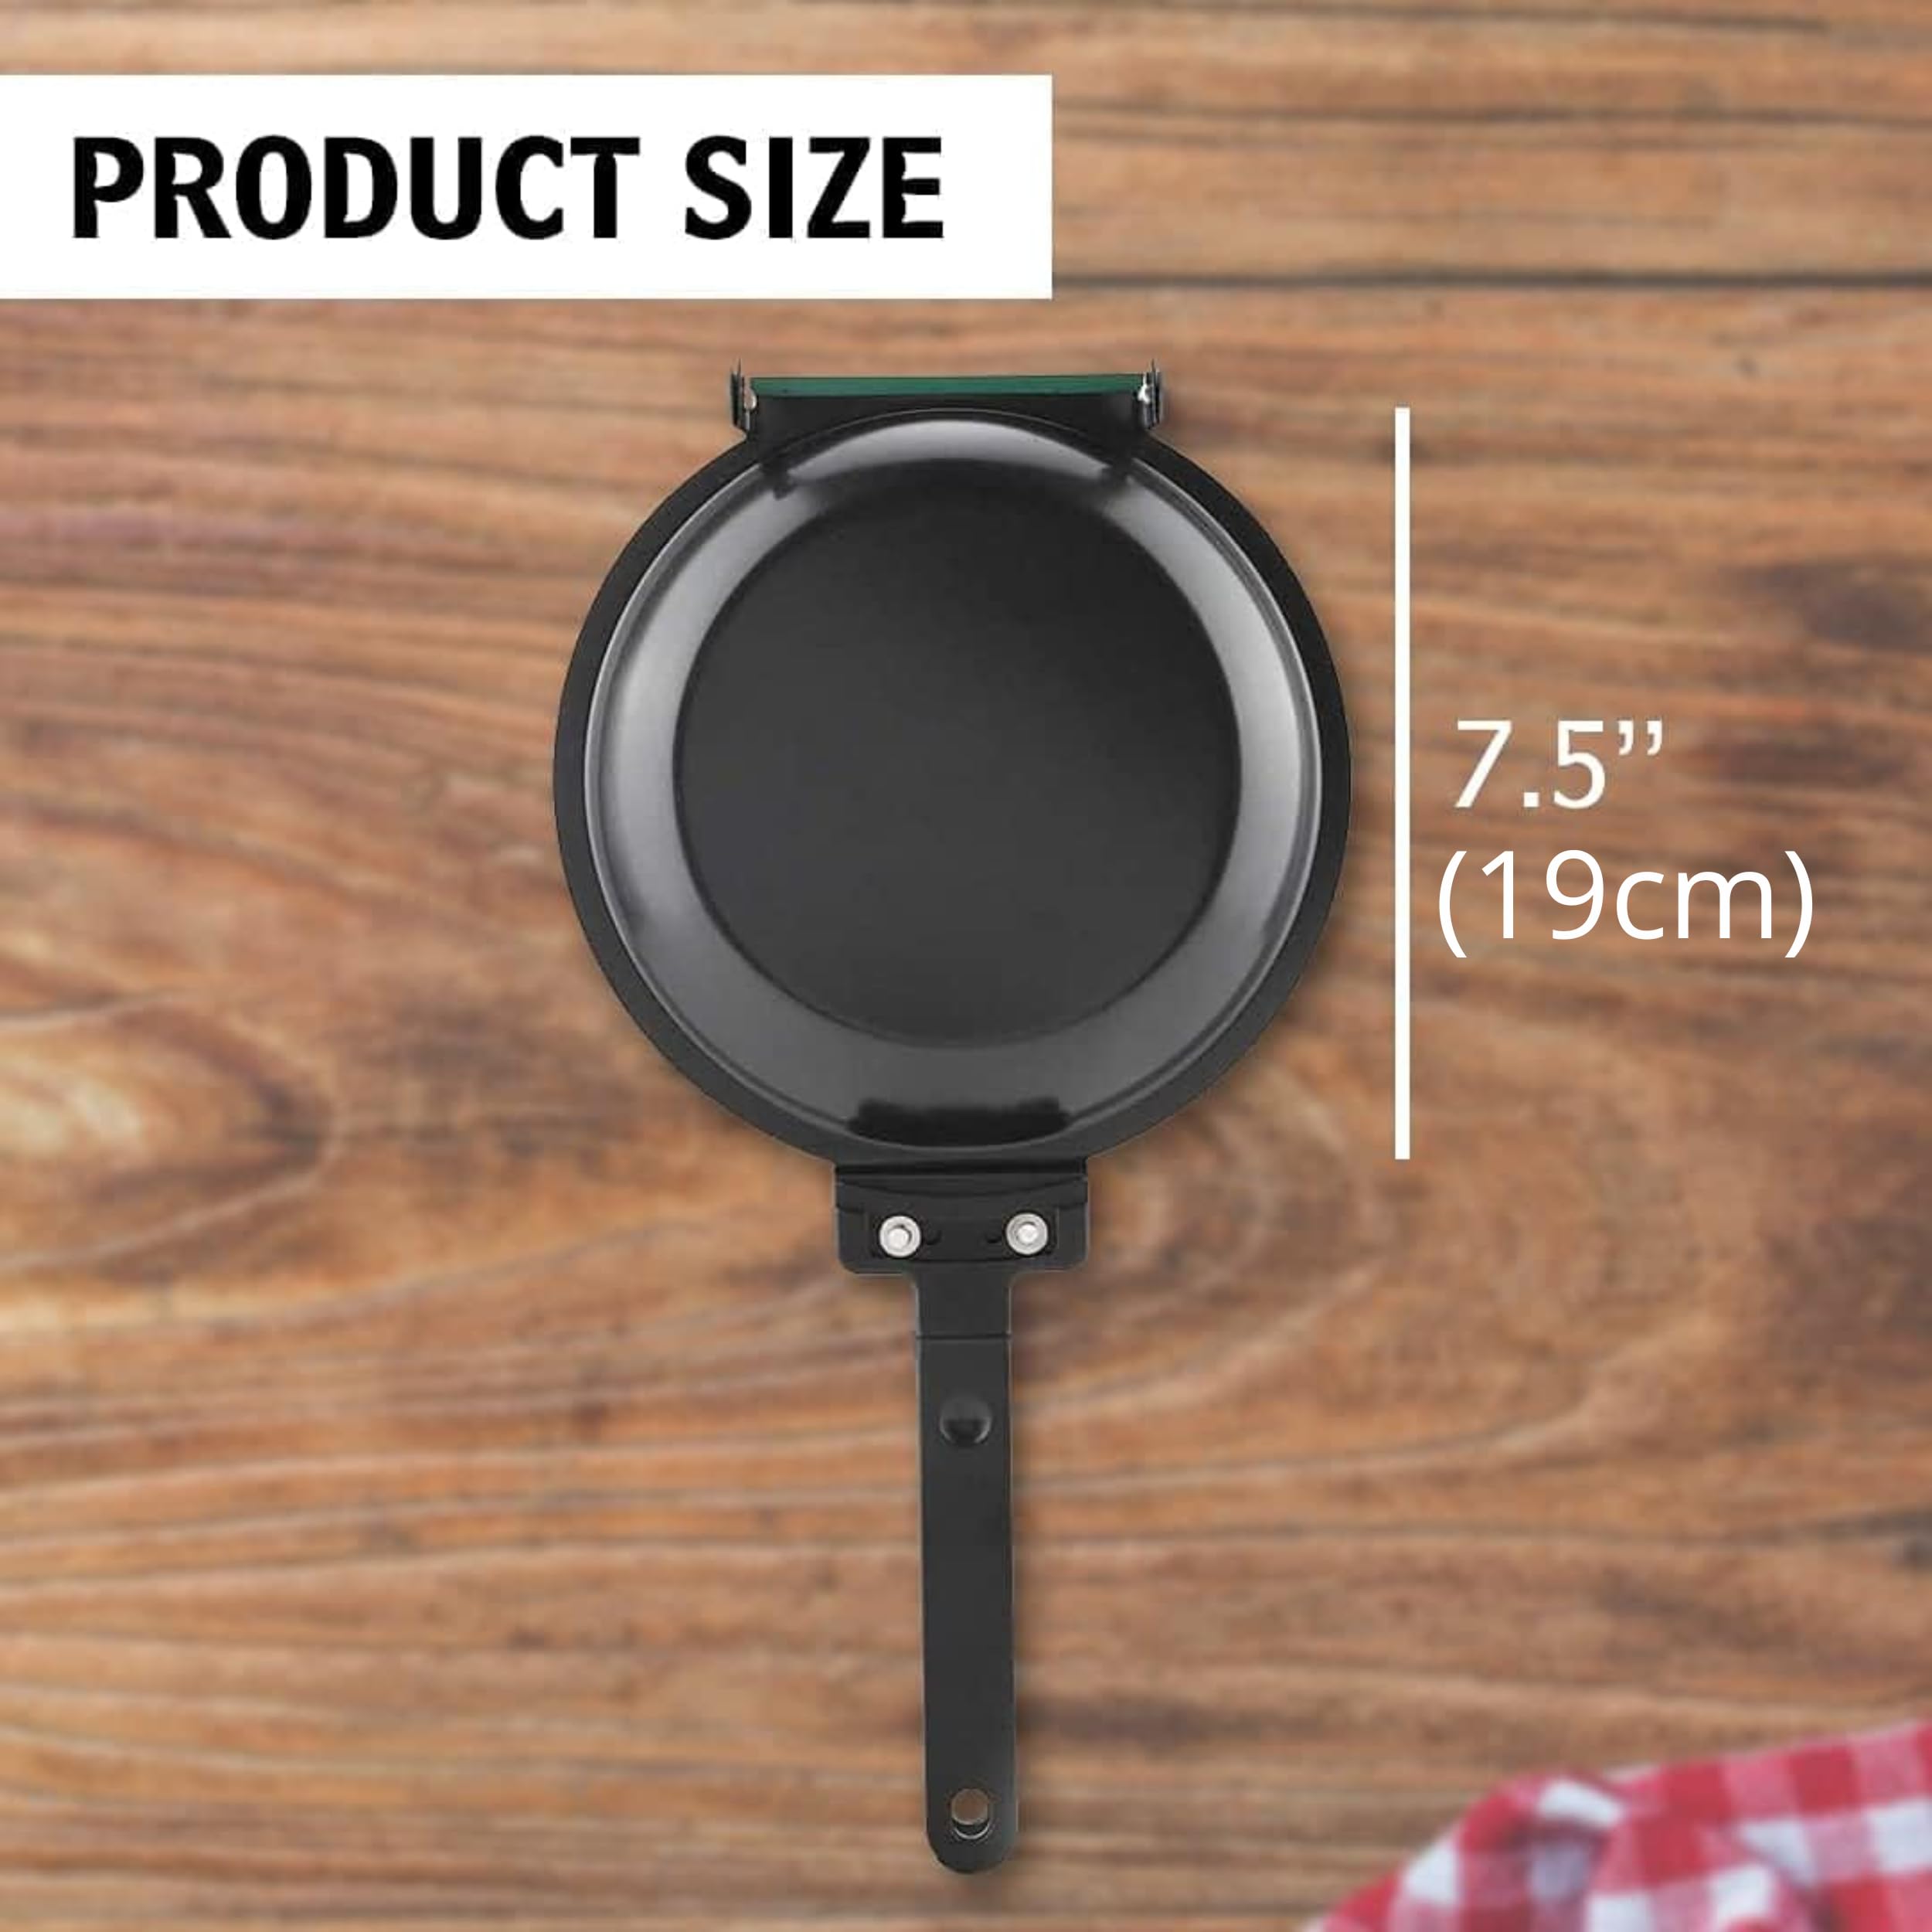 Killer's Instinct Outdoors 1 PCS Double-sided Frying Pan-Non-stick, Easy-to-clean Double-sided Frying Pan with Double-sided Flip Design